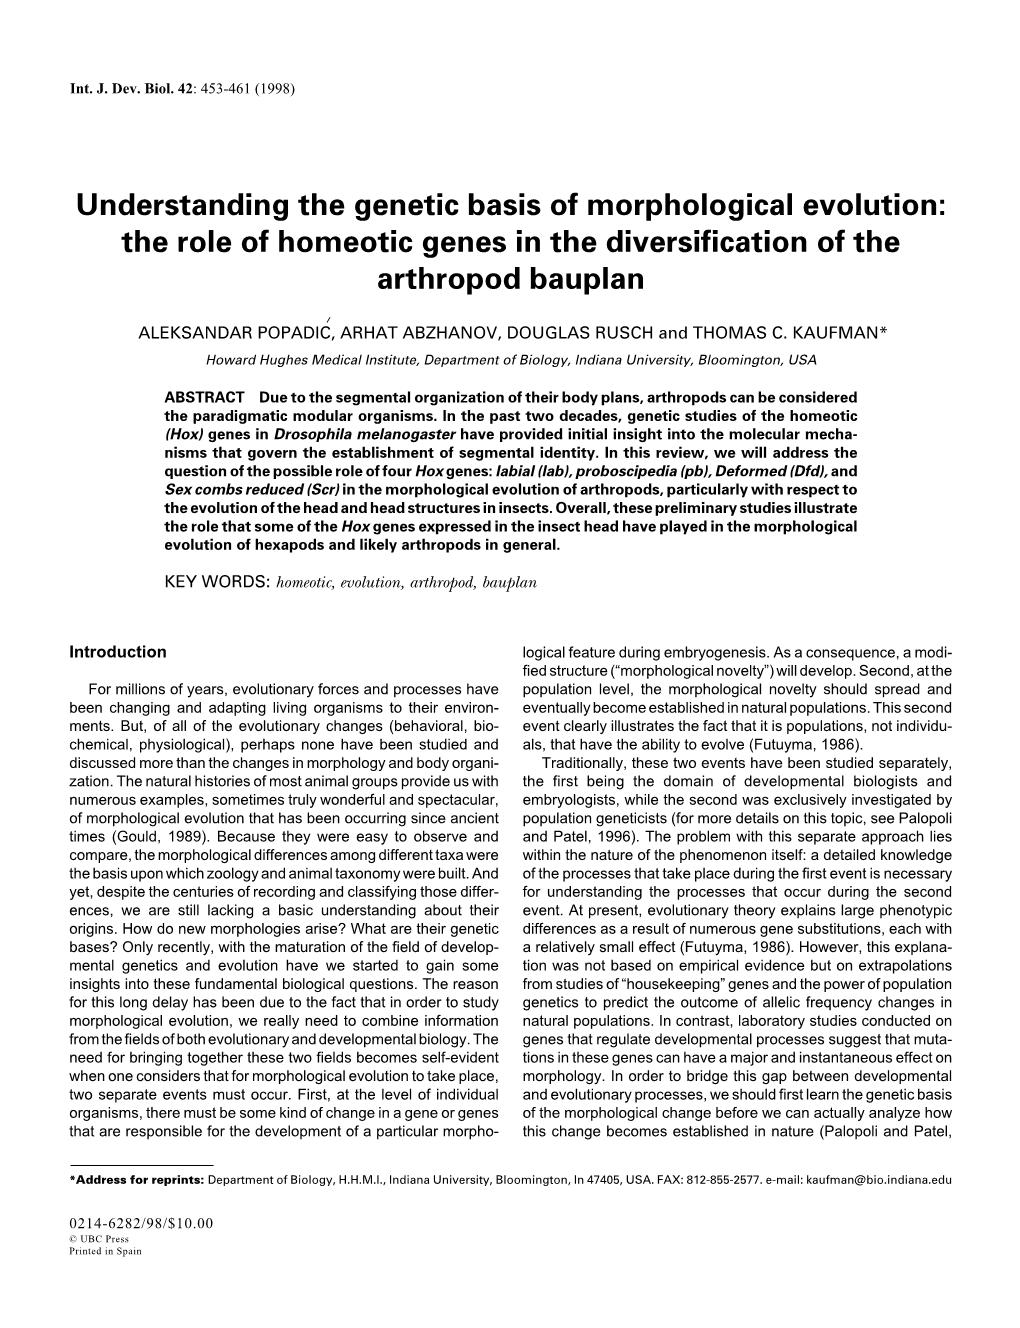 Understanding the Genetic Basis of Morphological Evolution: the Role of Homeotic Genes in the Diversification of the Arthropod Bauplan